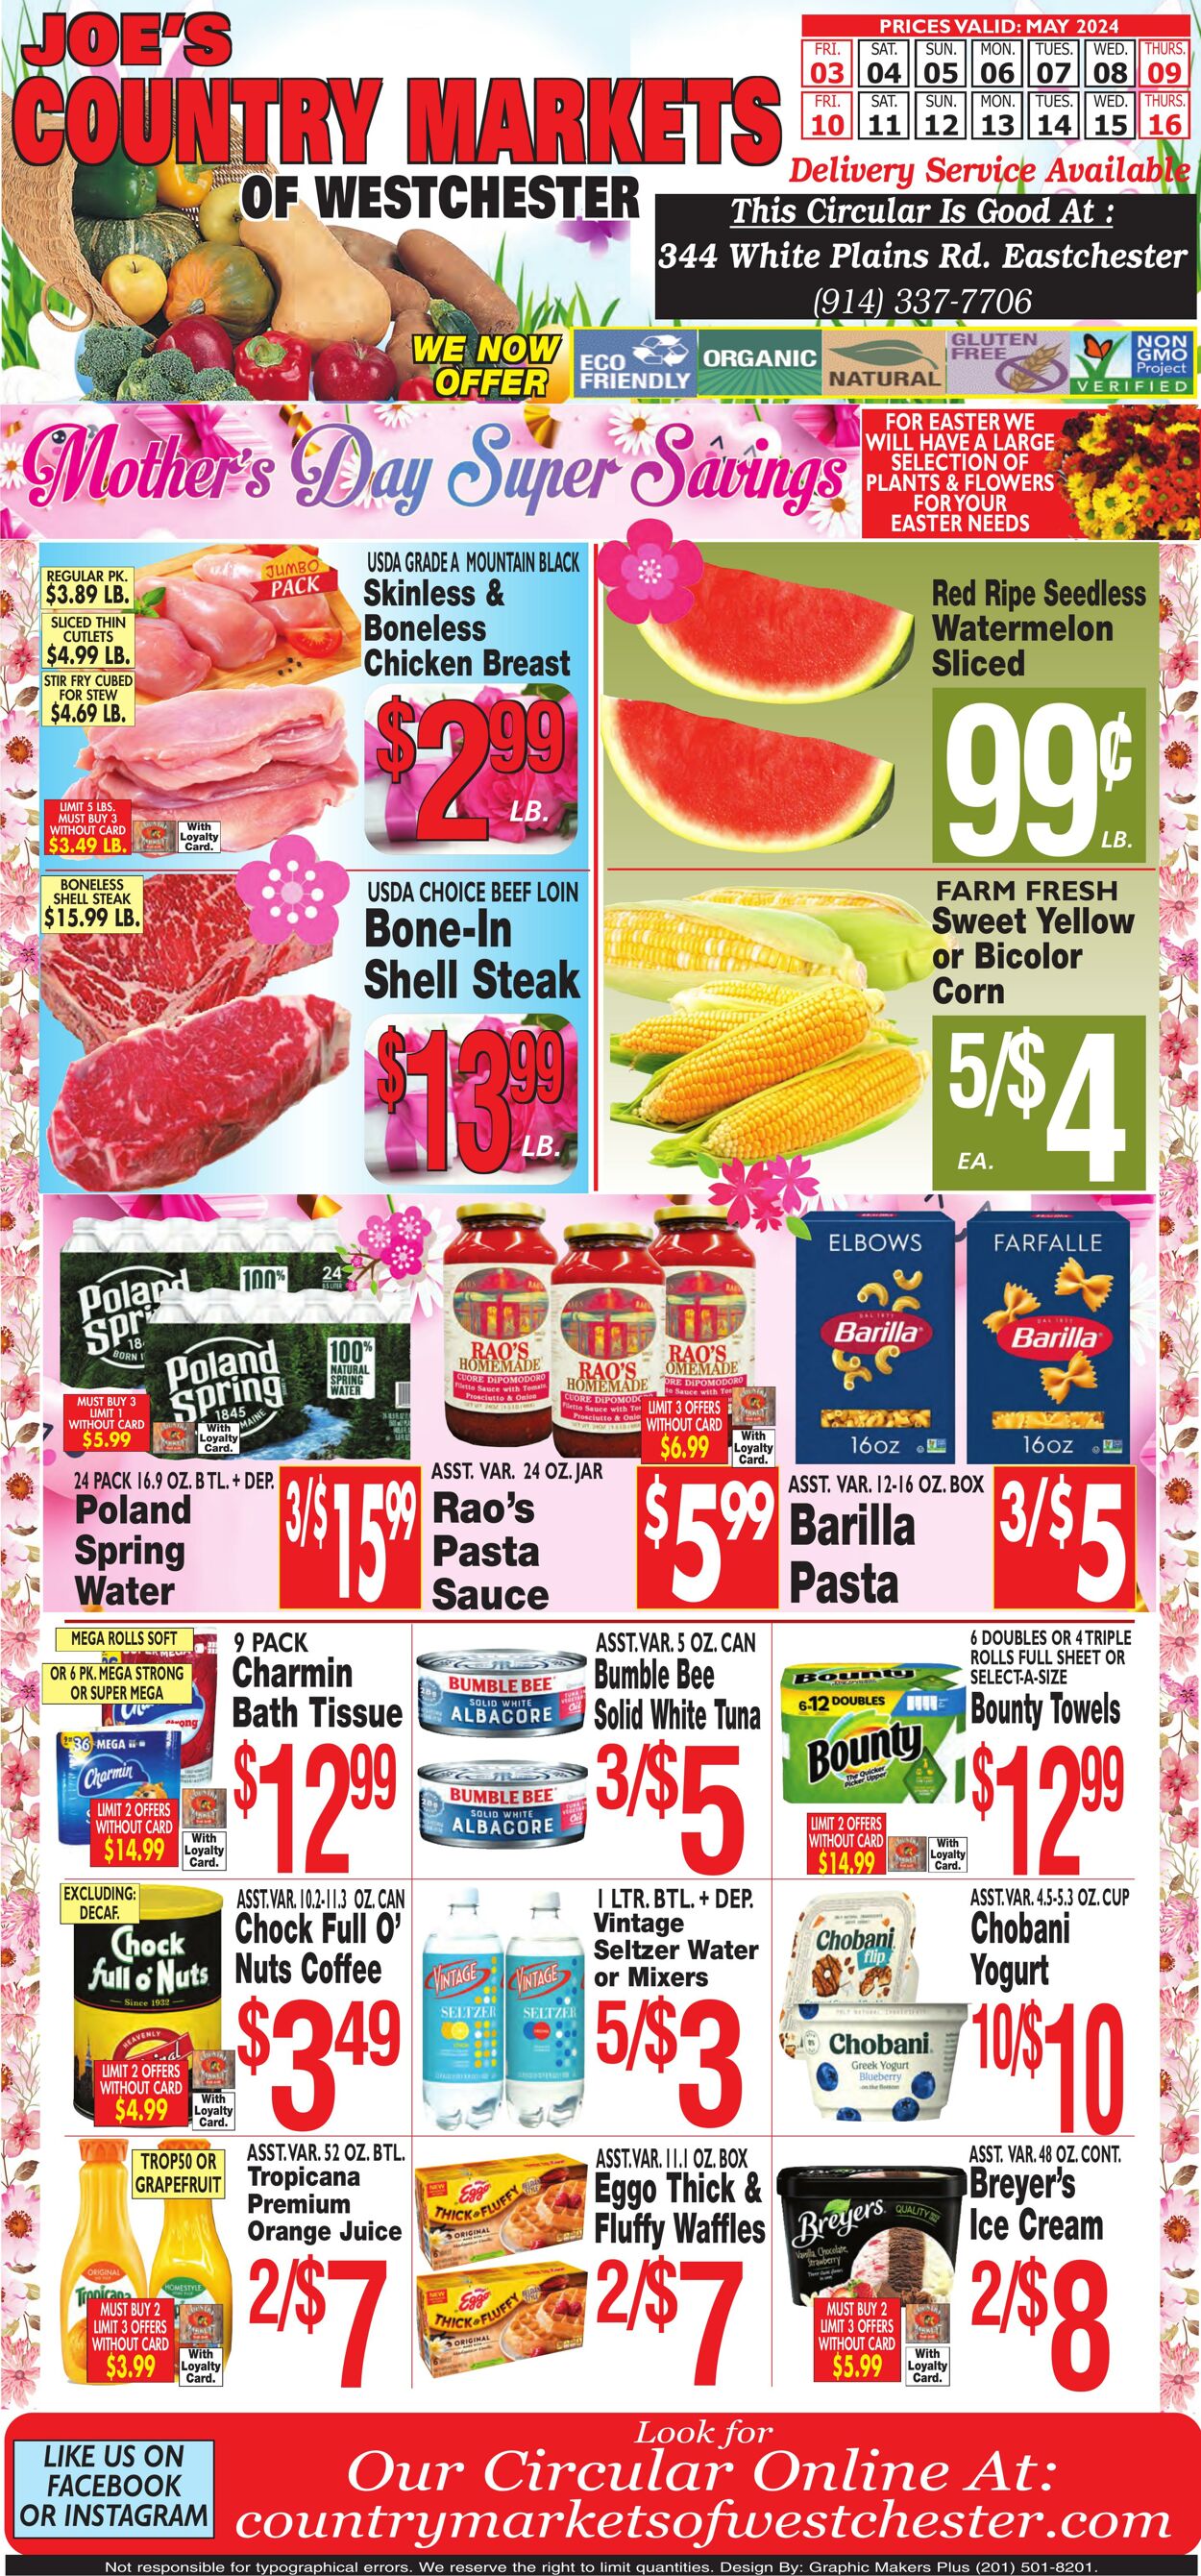 Country Markets of Westchester Promotional weekly ads